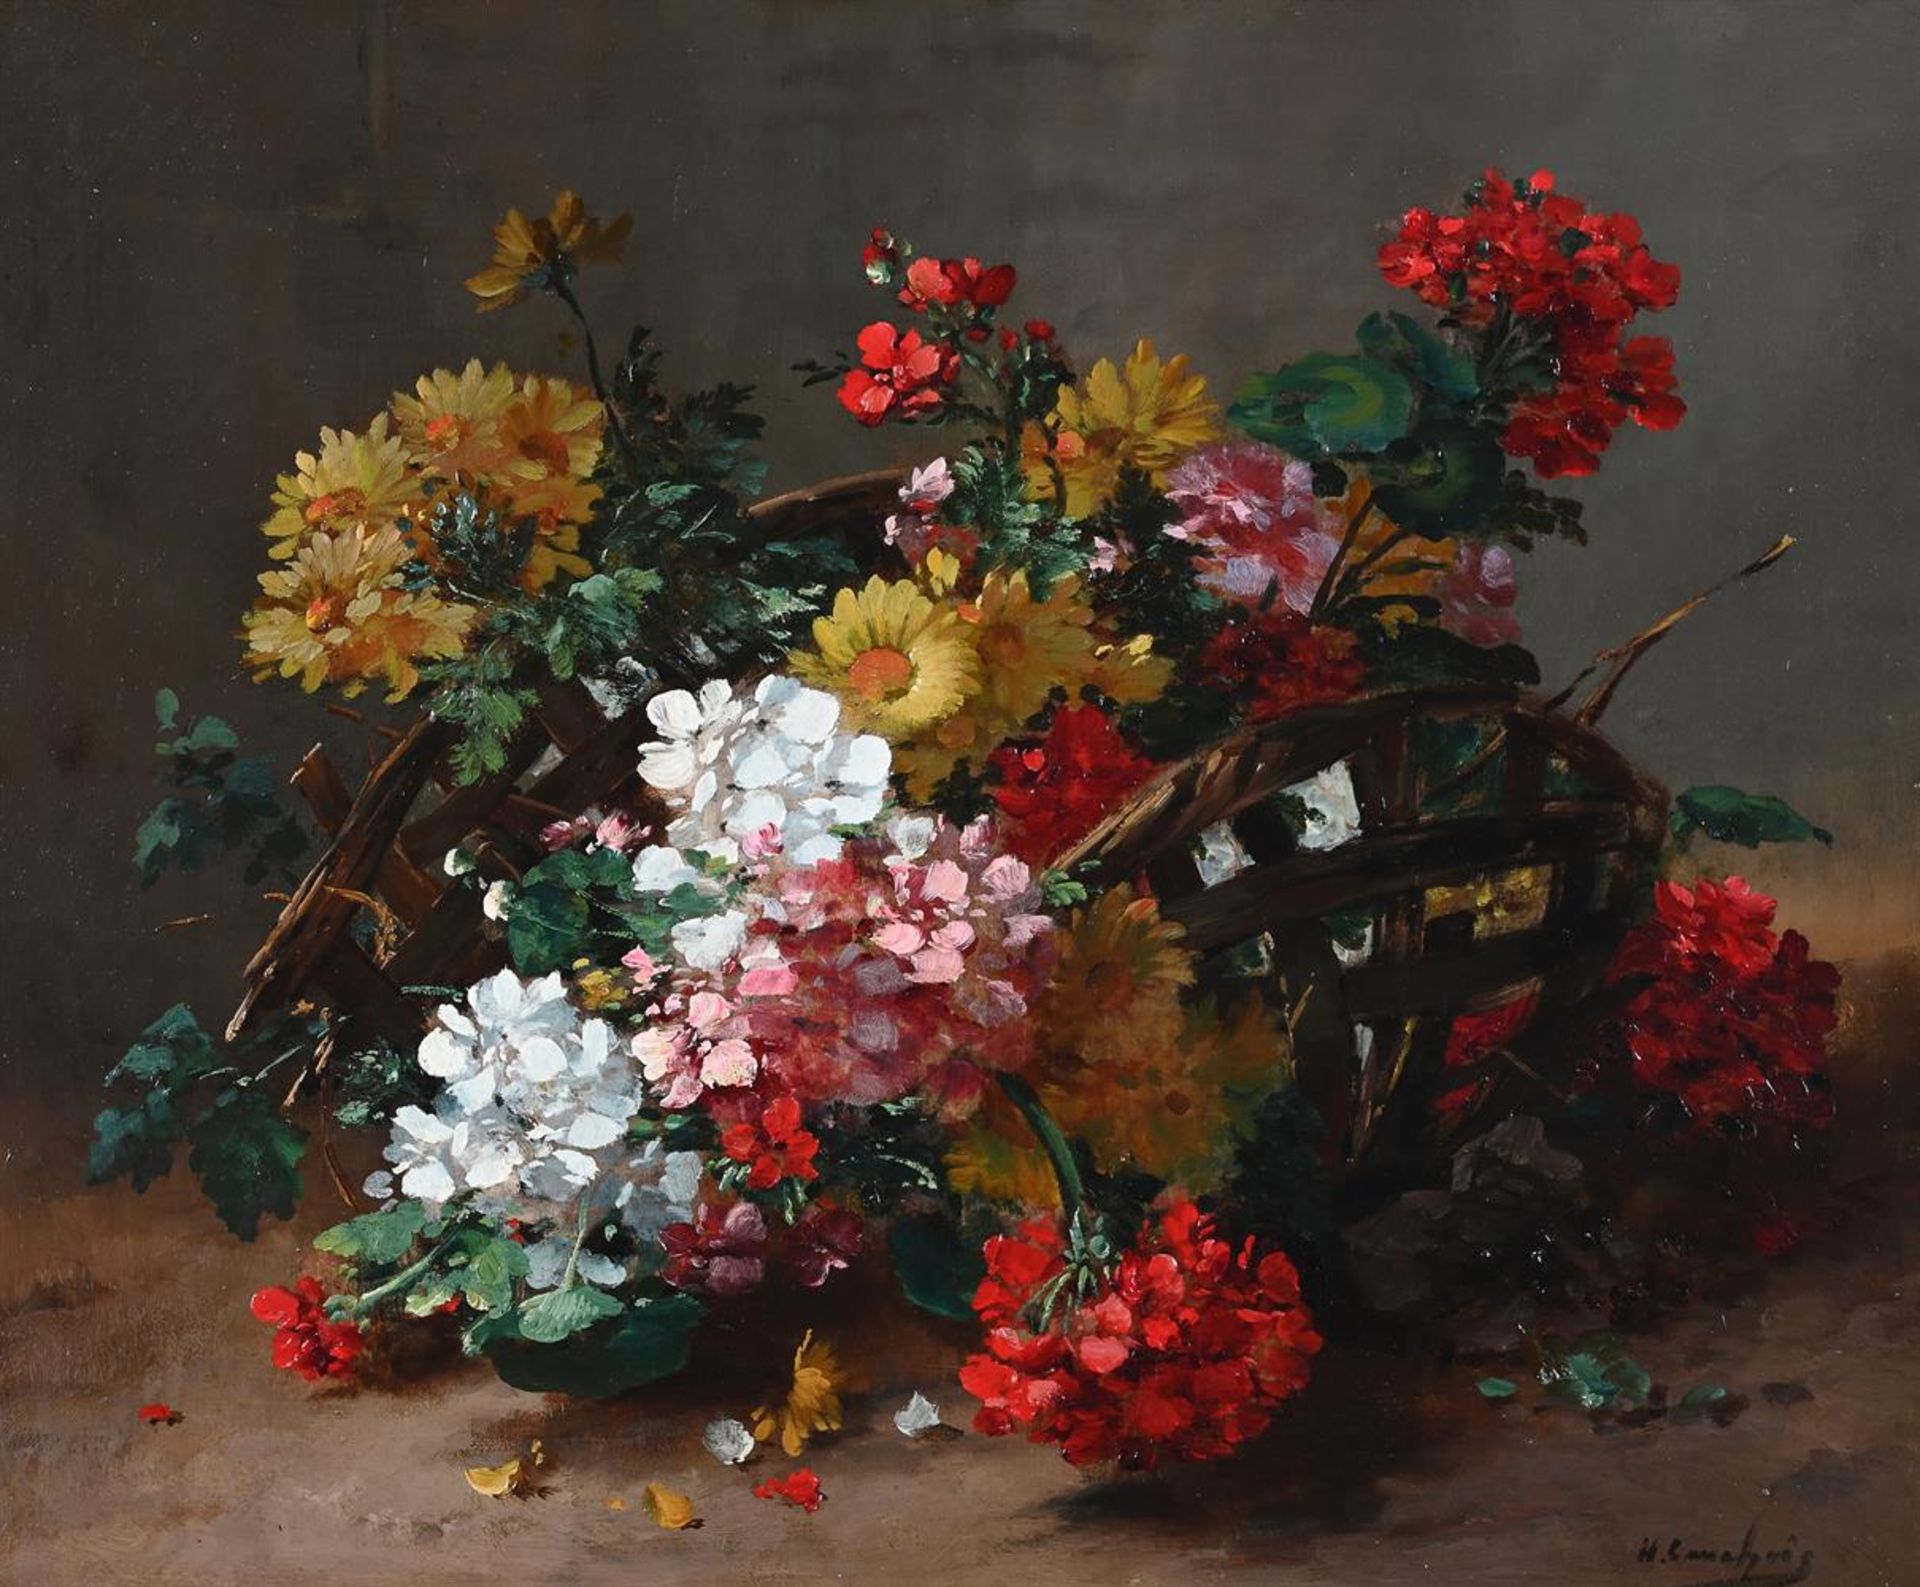 EUGÈNE HENRY CAUCHOIS (FRENCH 1850-1911), BASKET OF FLOWERS, A PAIR - Image 4 of 6